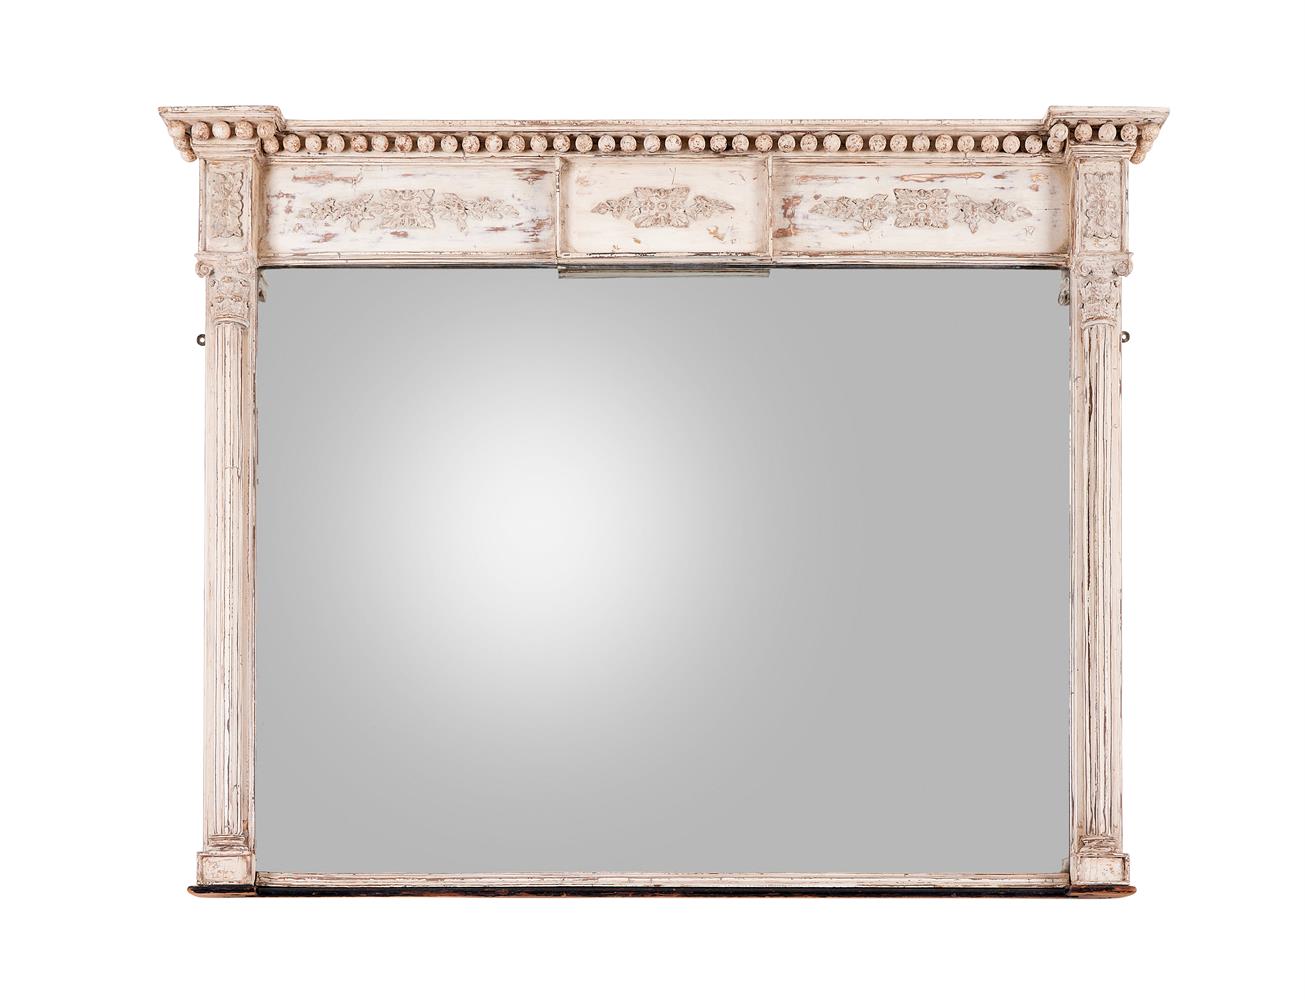 A CREAM PAINTED OVERMANTEL MIRROR IN THE REGENCY STYLE, 19TH CENTURY